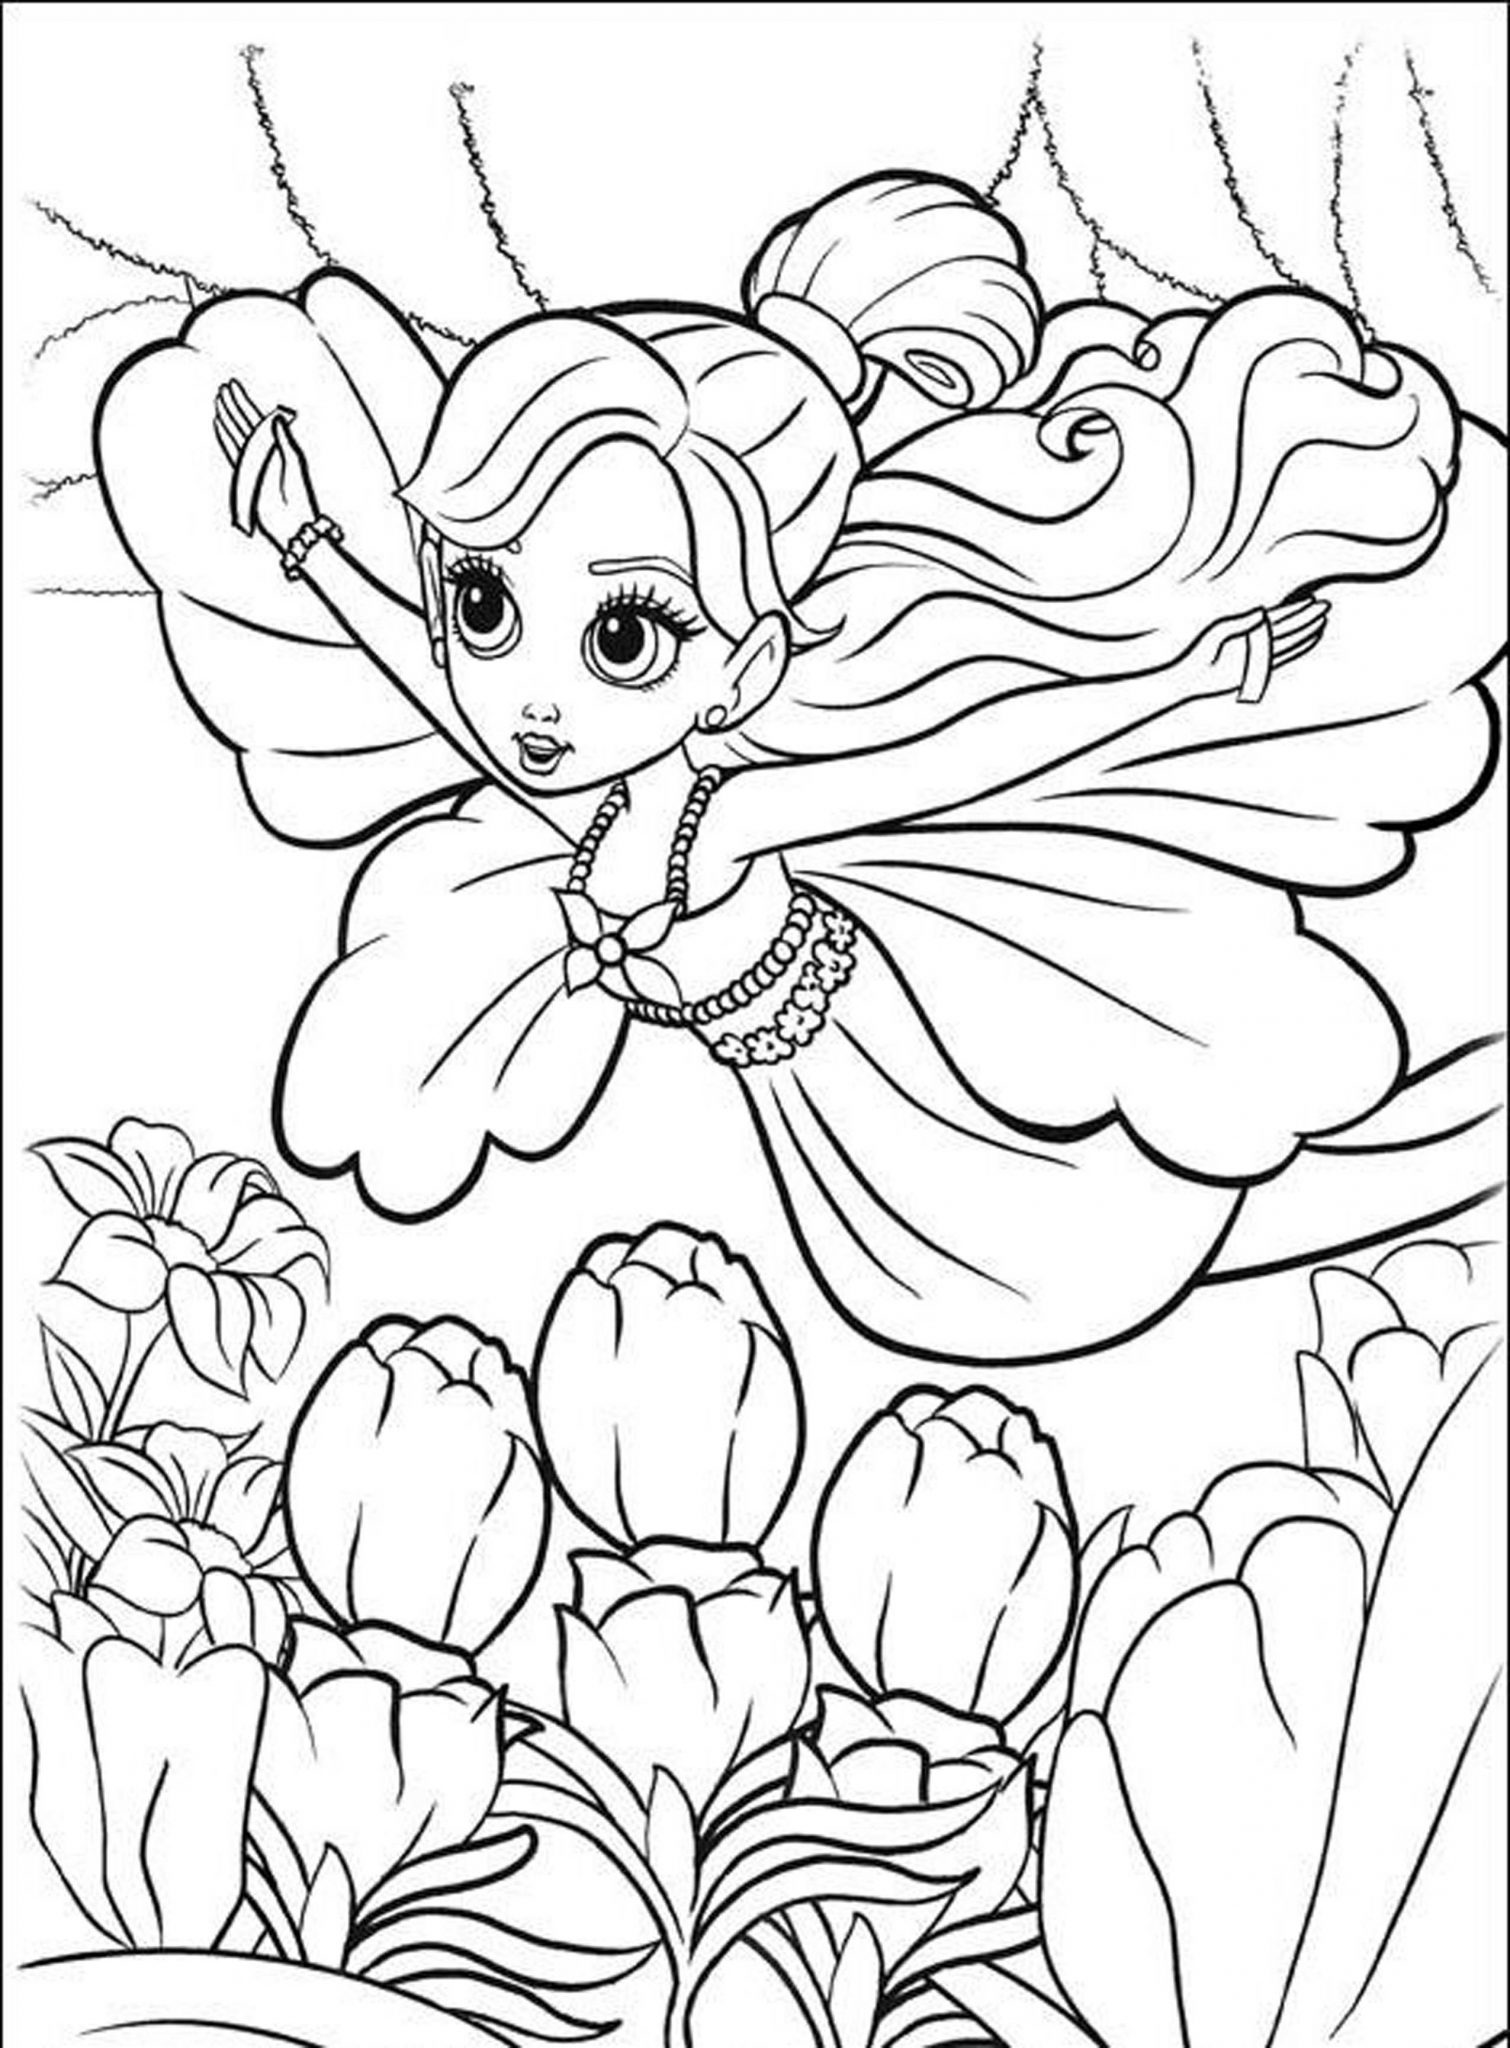 Print & Download - Coloring Pages for Girls, Recommend a ...